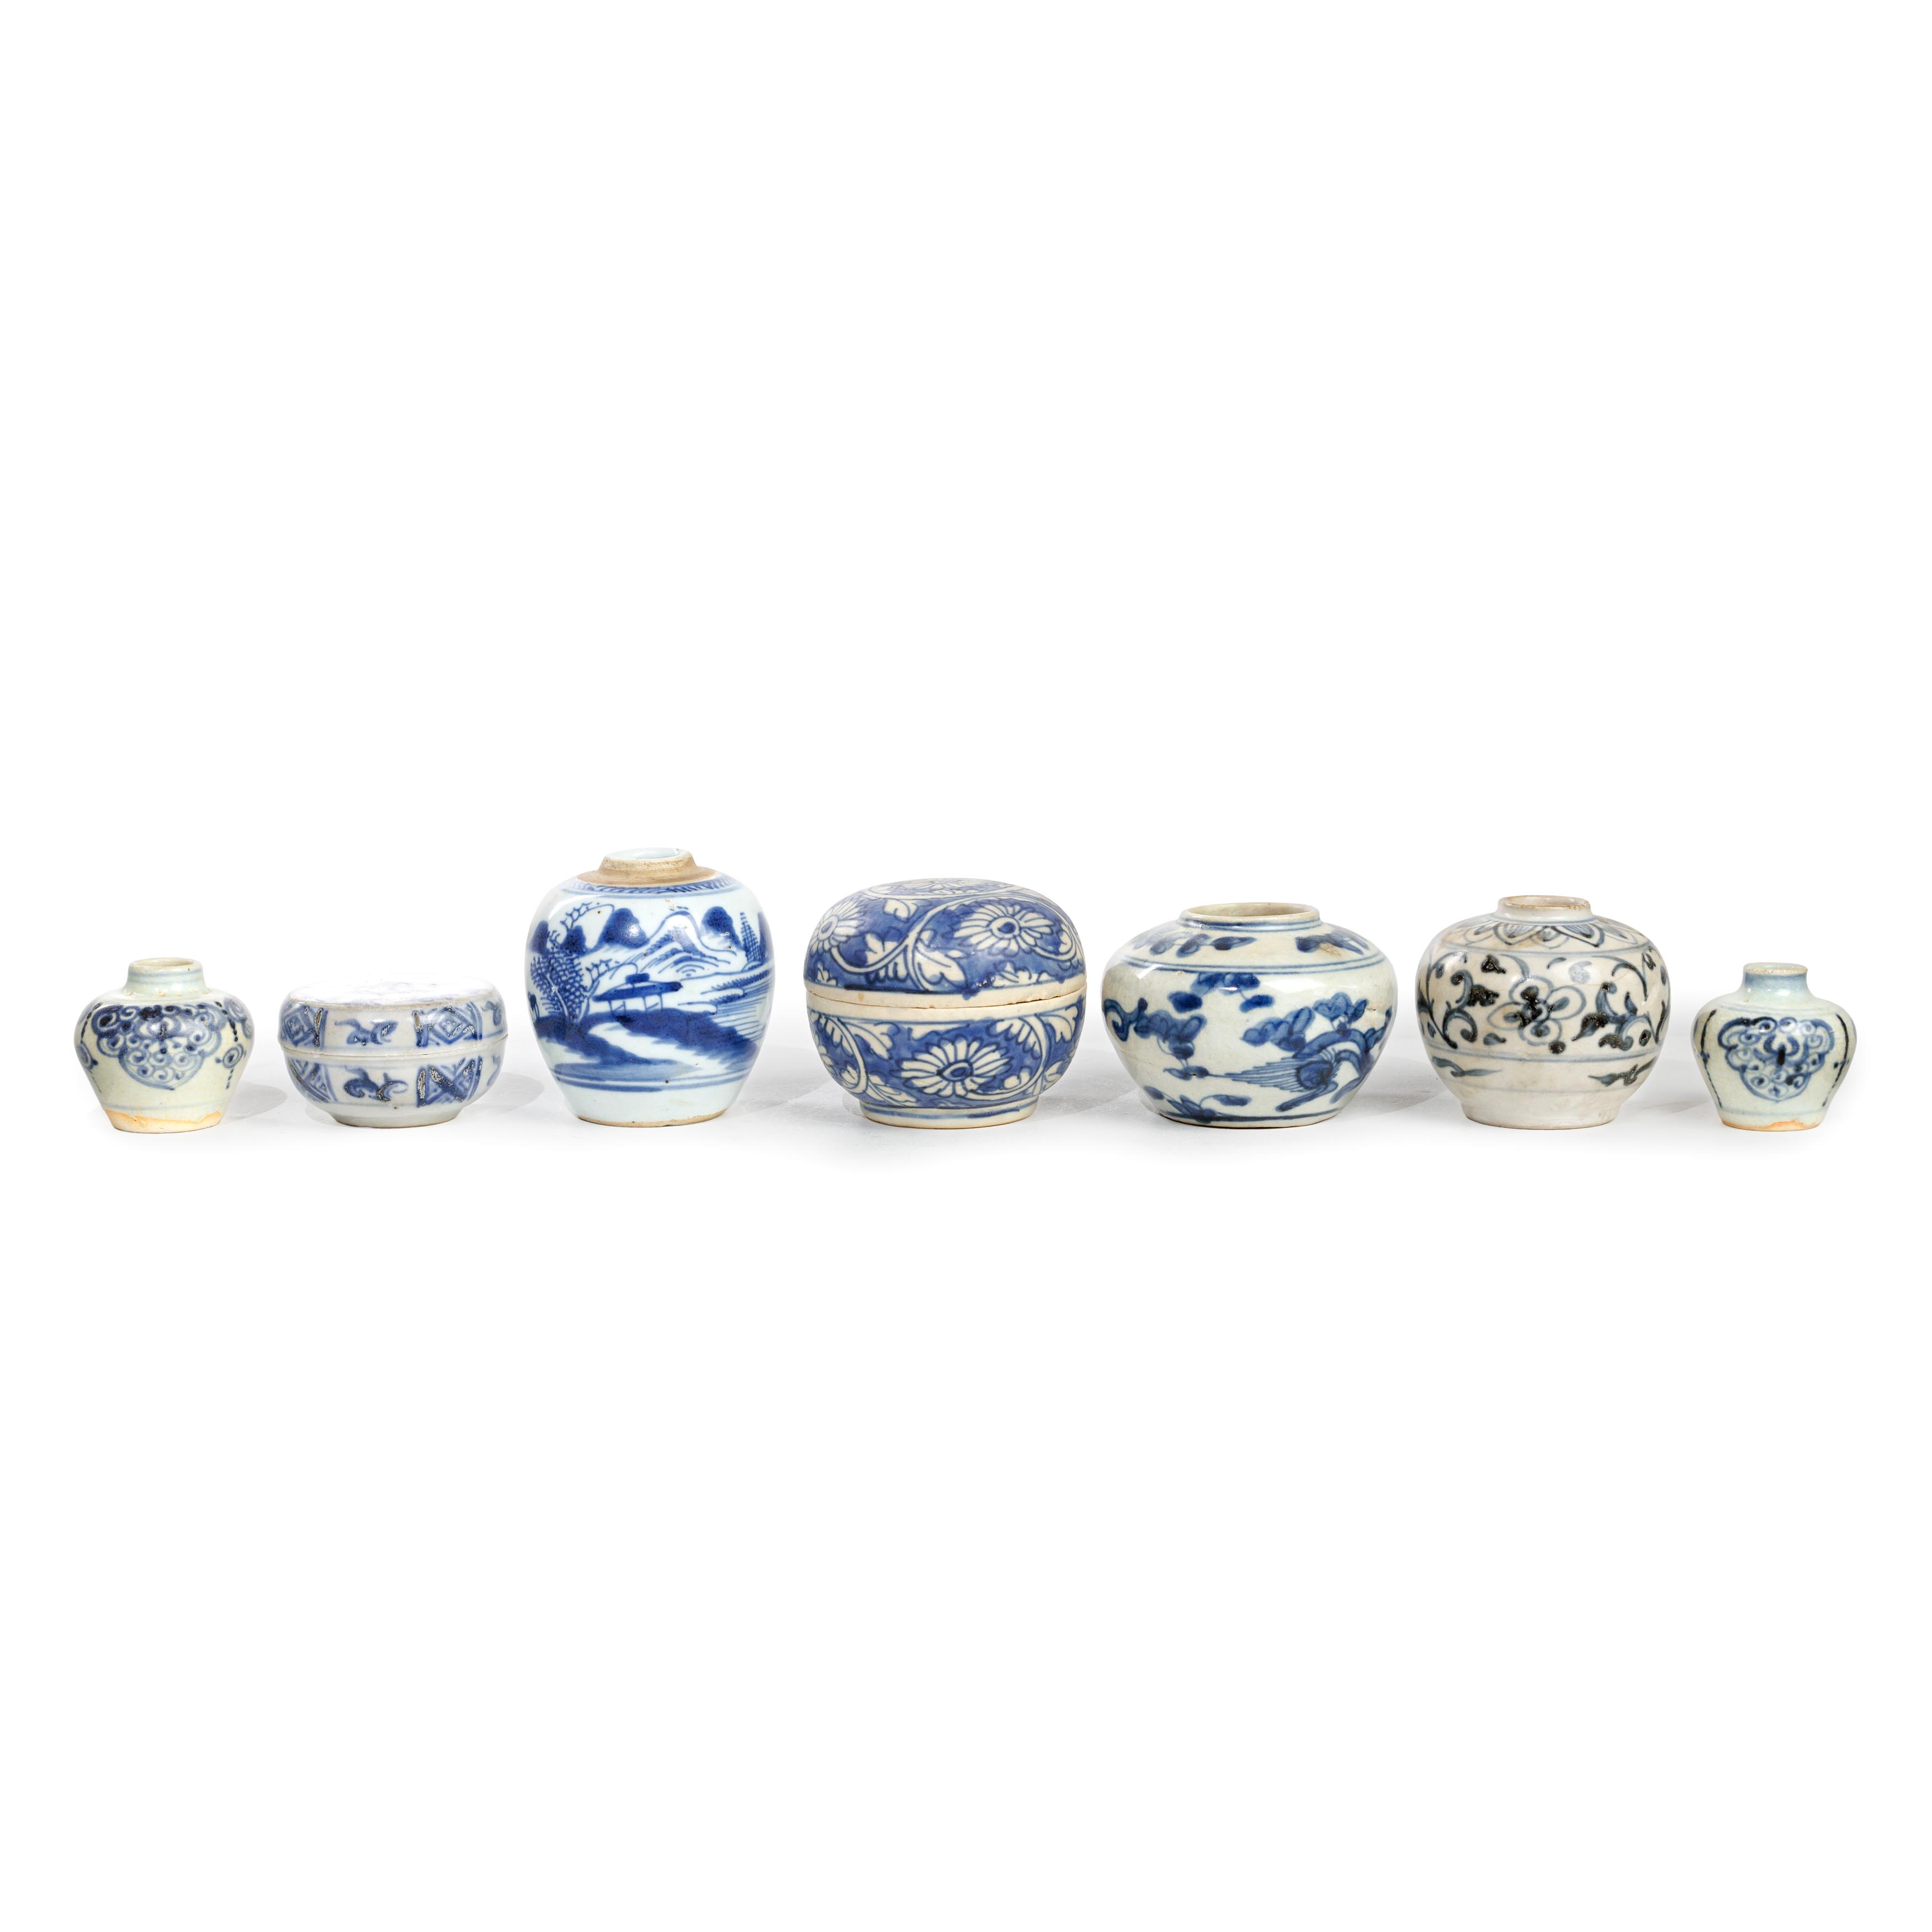 A group of Chinese and Annamese blue and white vessels Ming dynasty, 15th century - Qing dynasty... - Image 3 of 3